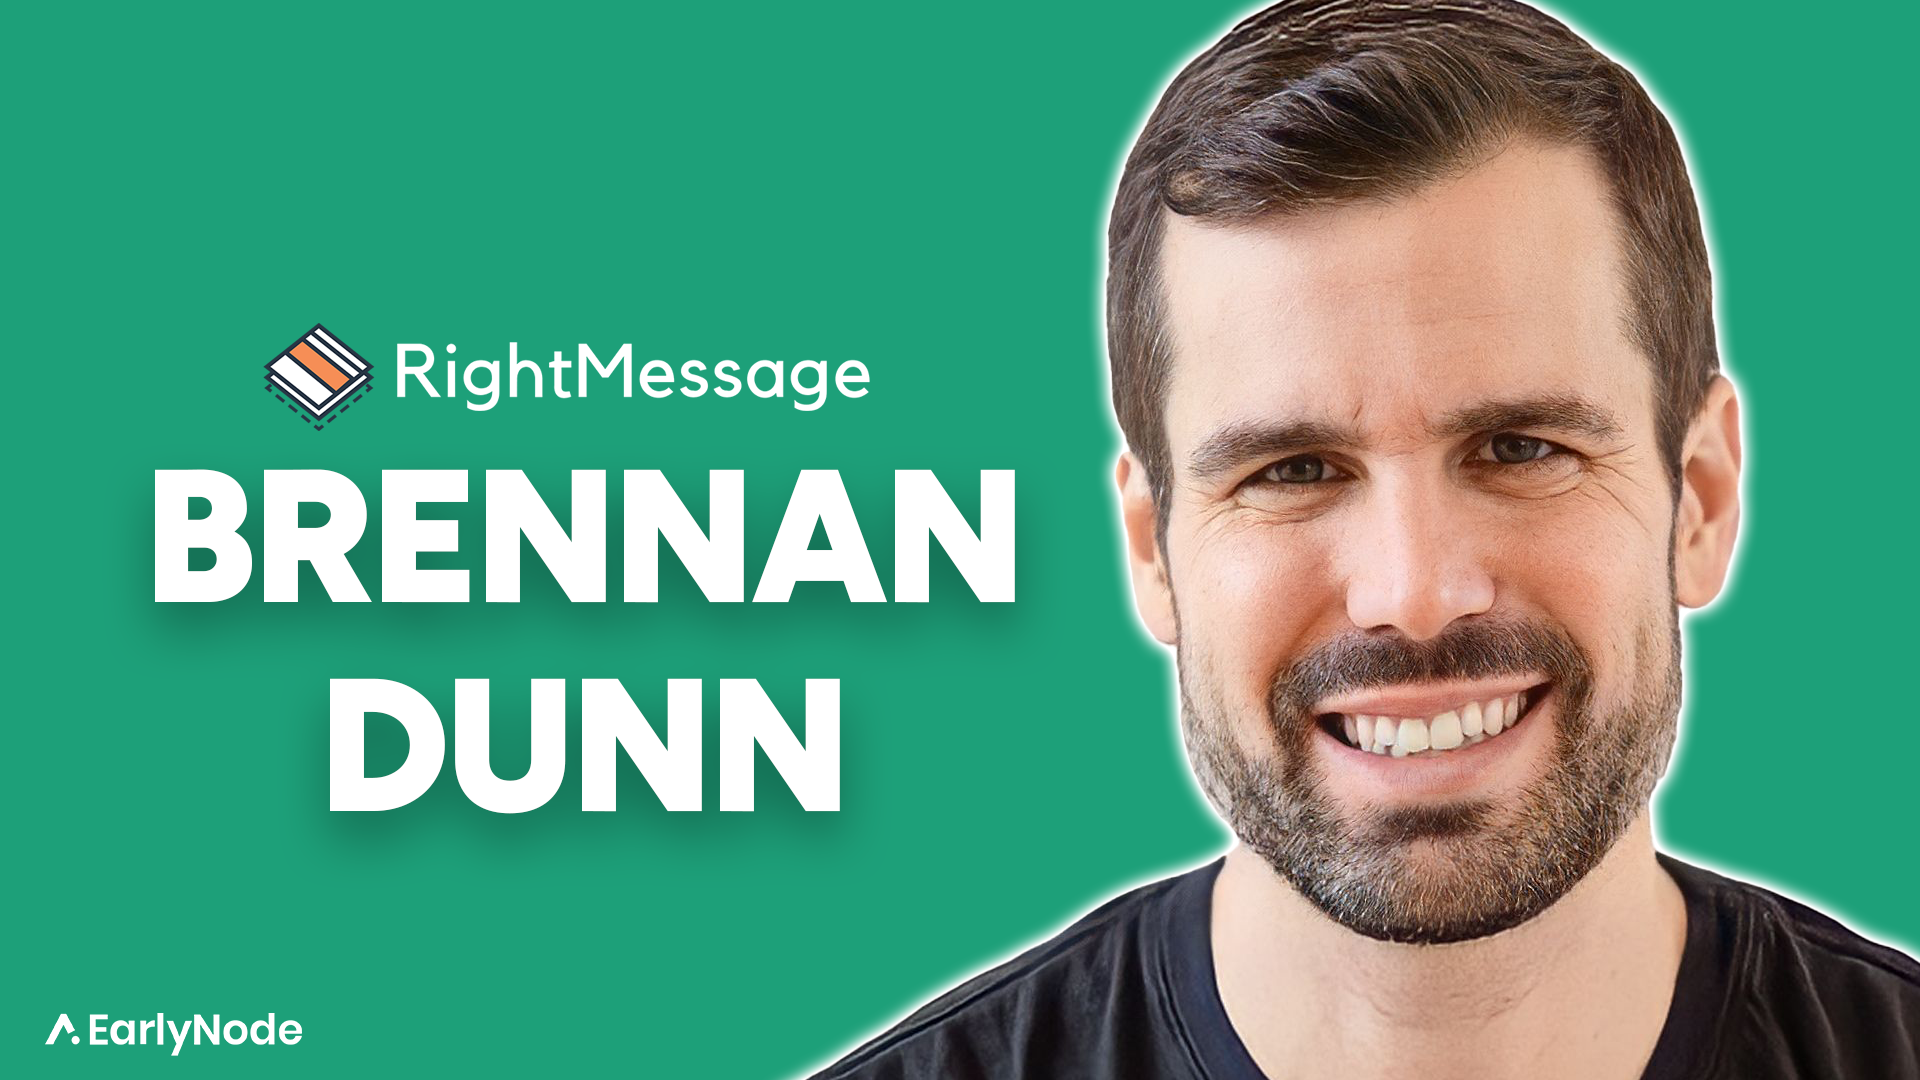 How to bootstrap a SaaS startup as a content creator with Brennan Dunn (Founder of RightMessage)